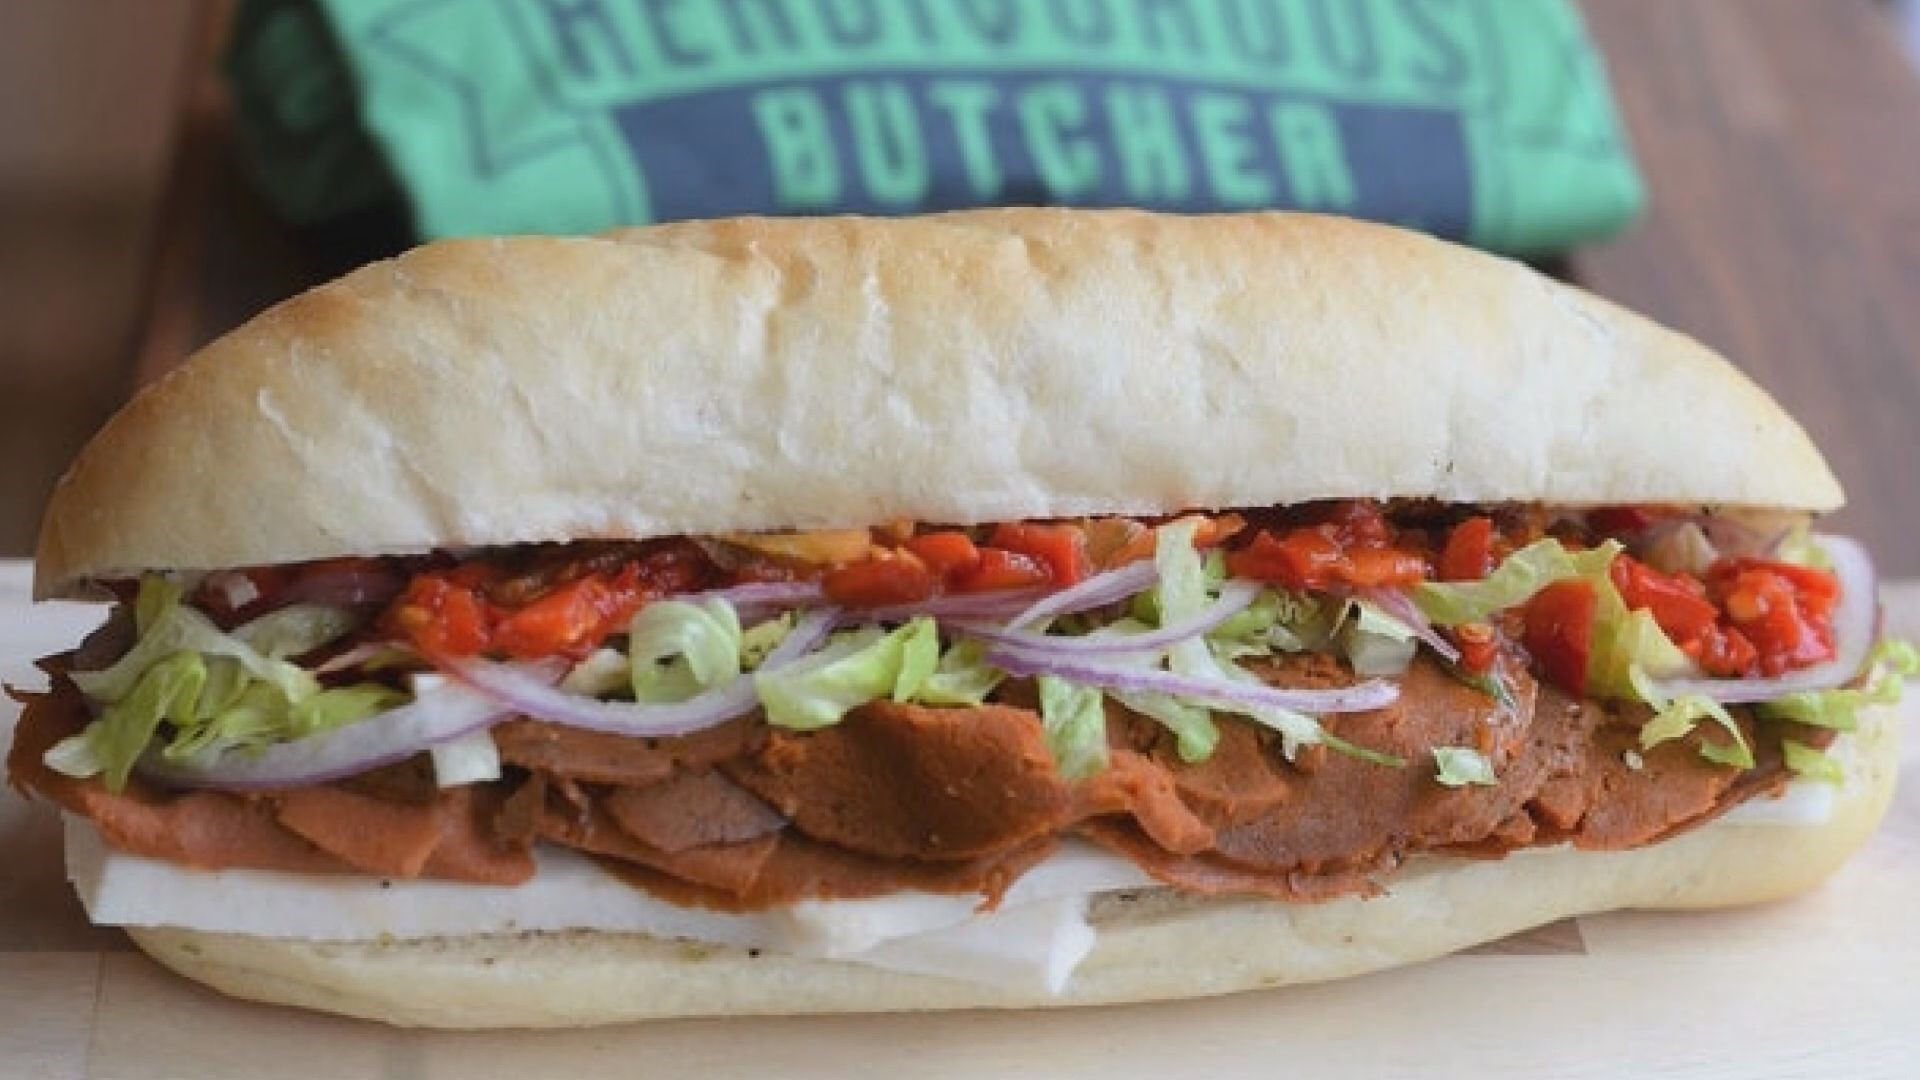 Alicia Lewis joins the team at The Herbivorous Butcher to make their best-selling vegan sandwich.